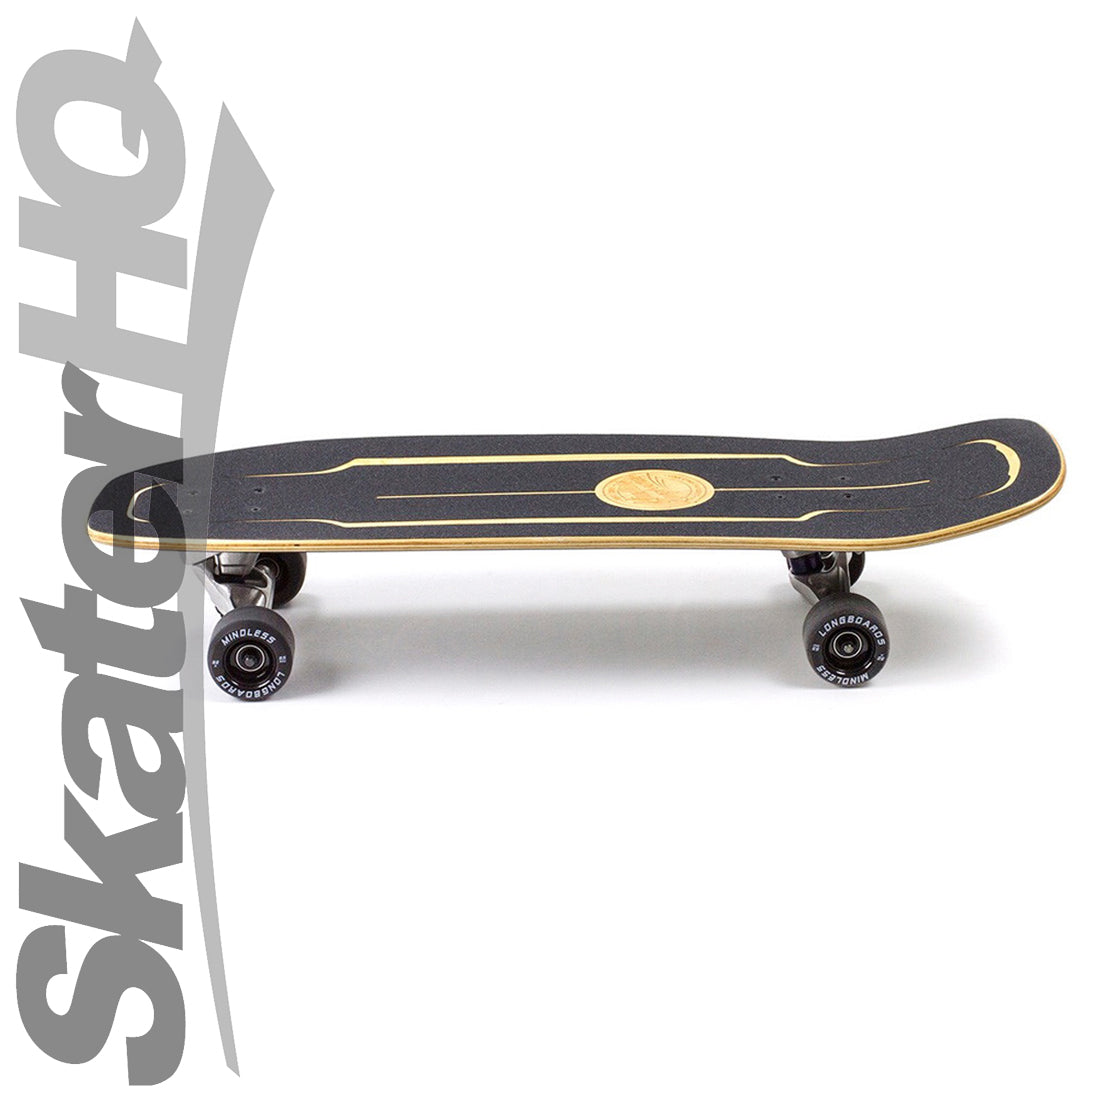 Mindless 30 Surfskate Complete - Black Skateboard Compl Carving and Specialty